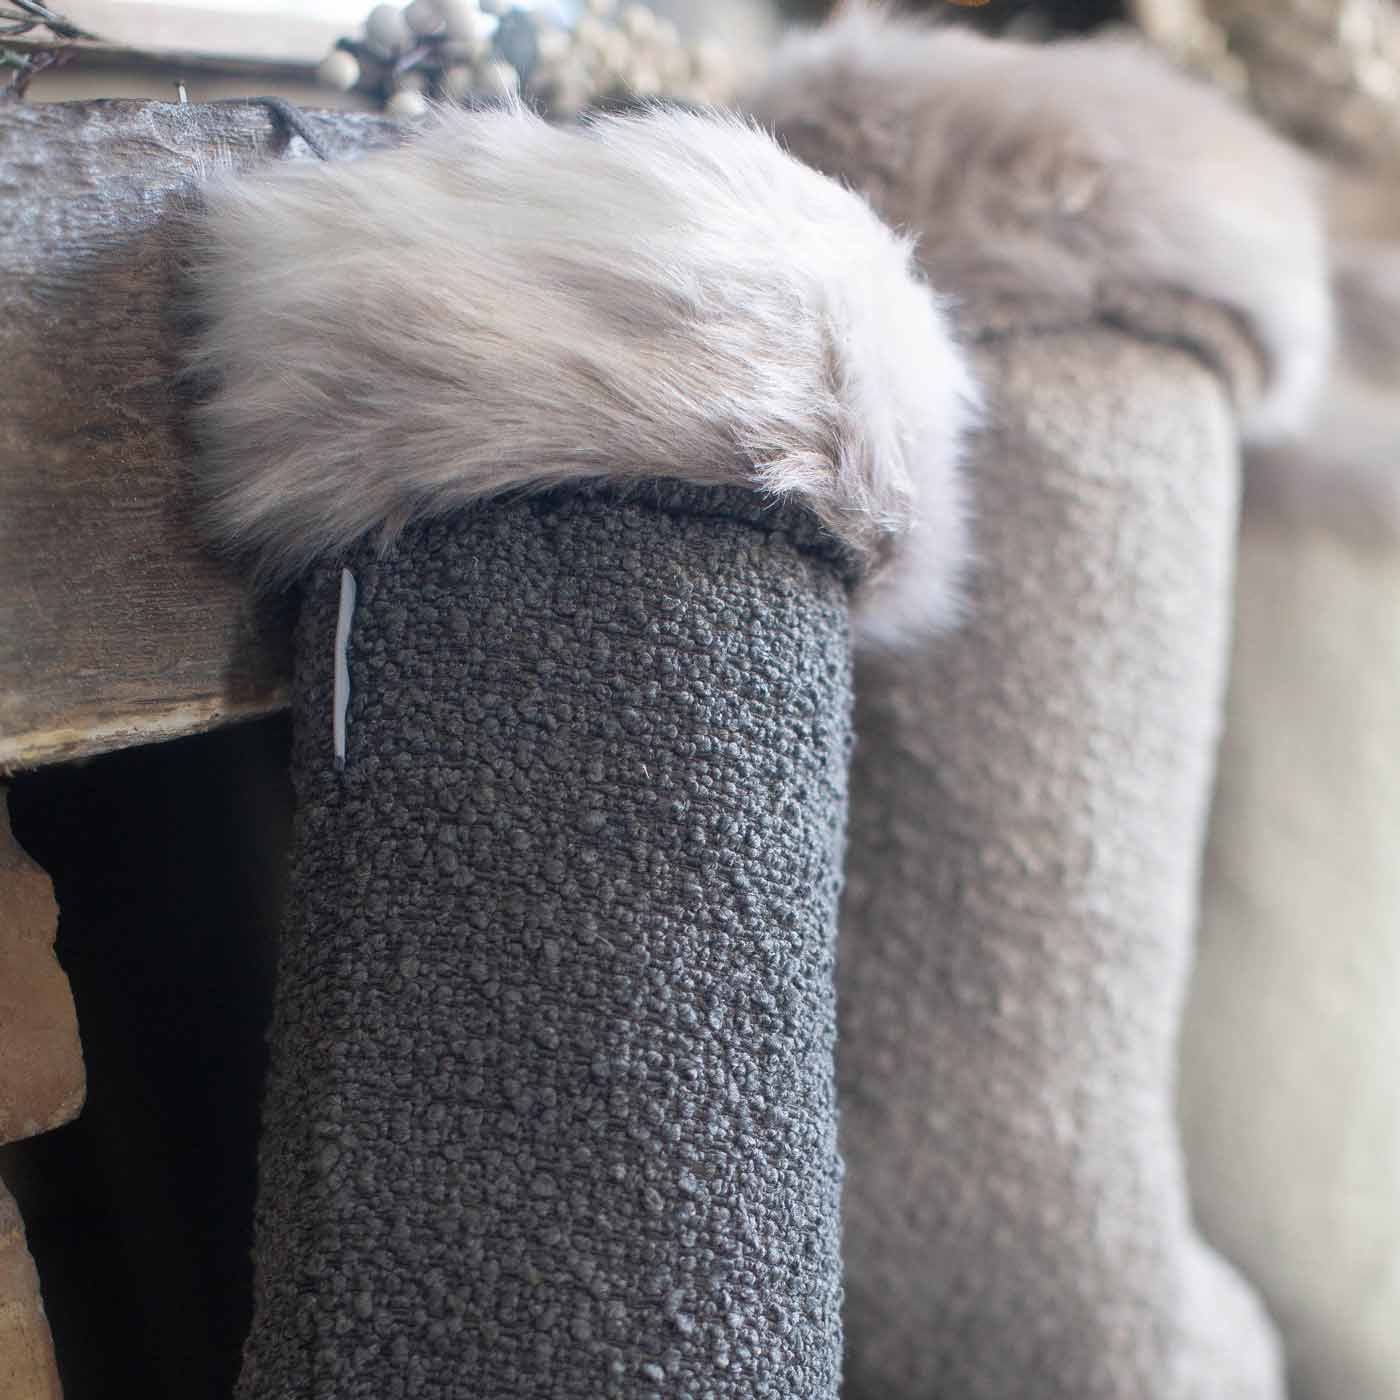 Gift your furry friend the perfect pet Christmas gift with our beautifully crafted Christmas Stocking Sock, fill and gift your pet this festive holiday with the most wholesome gifts for Christmas! Available now in stunning Granite Boucle at Lords & Labradors 